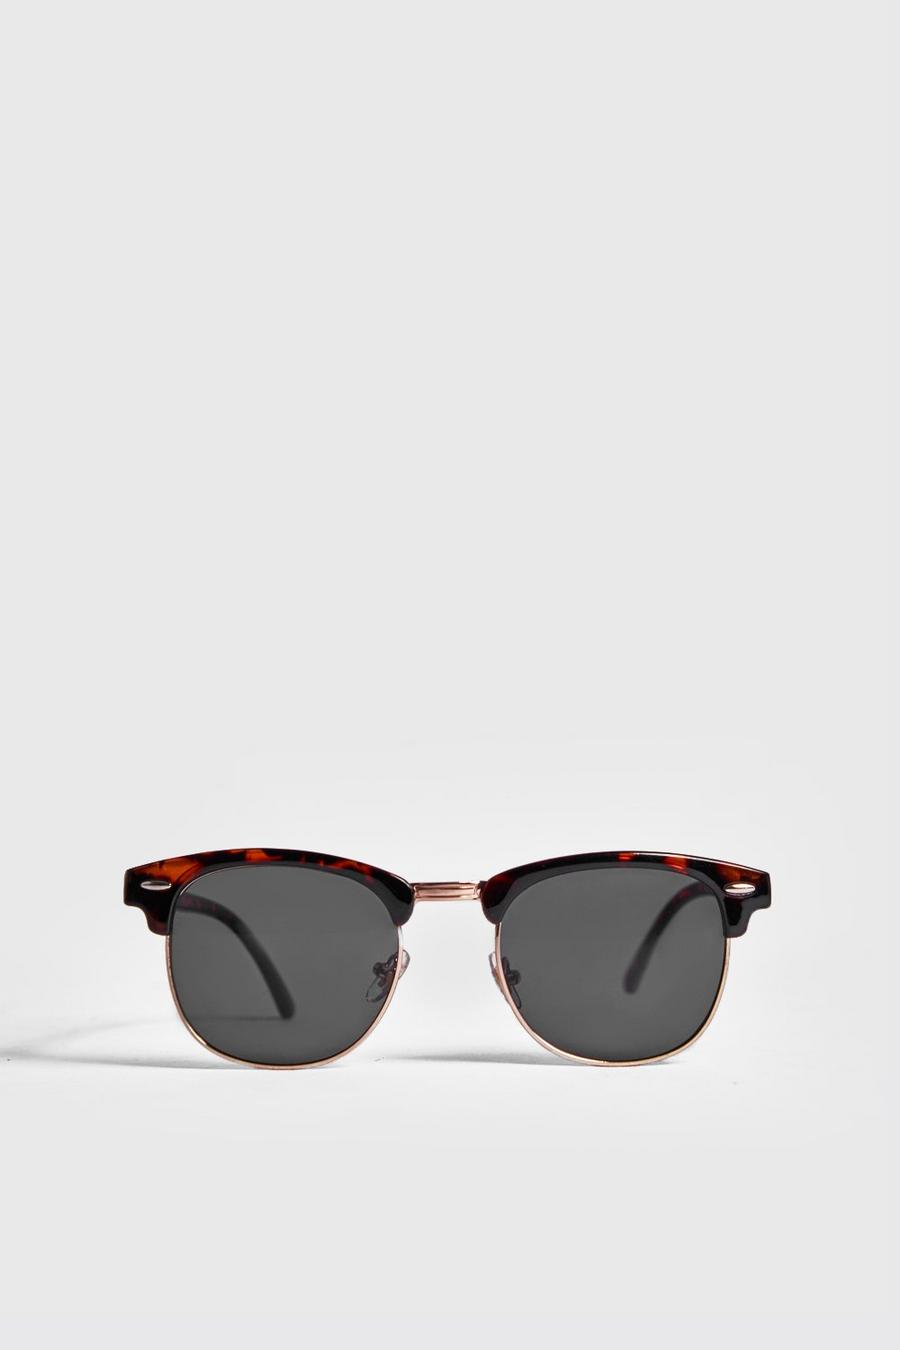 Brown Retro Sunglasses With Tortoise Frame image number 1